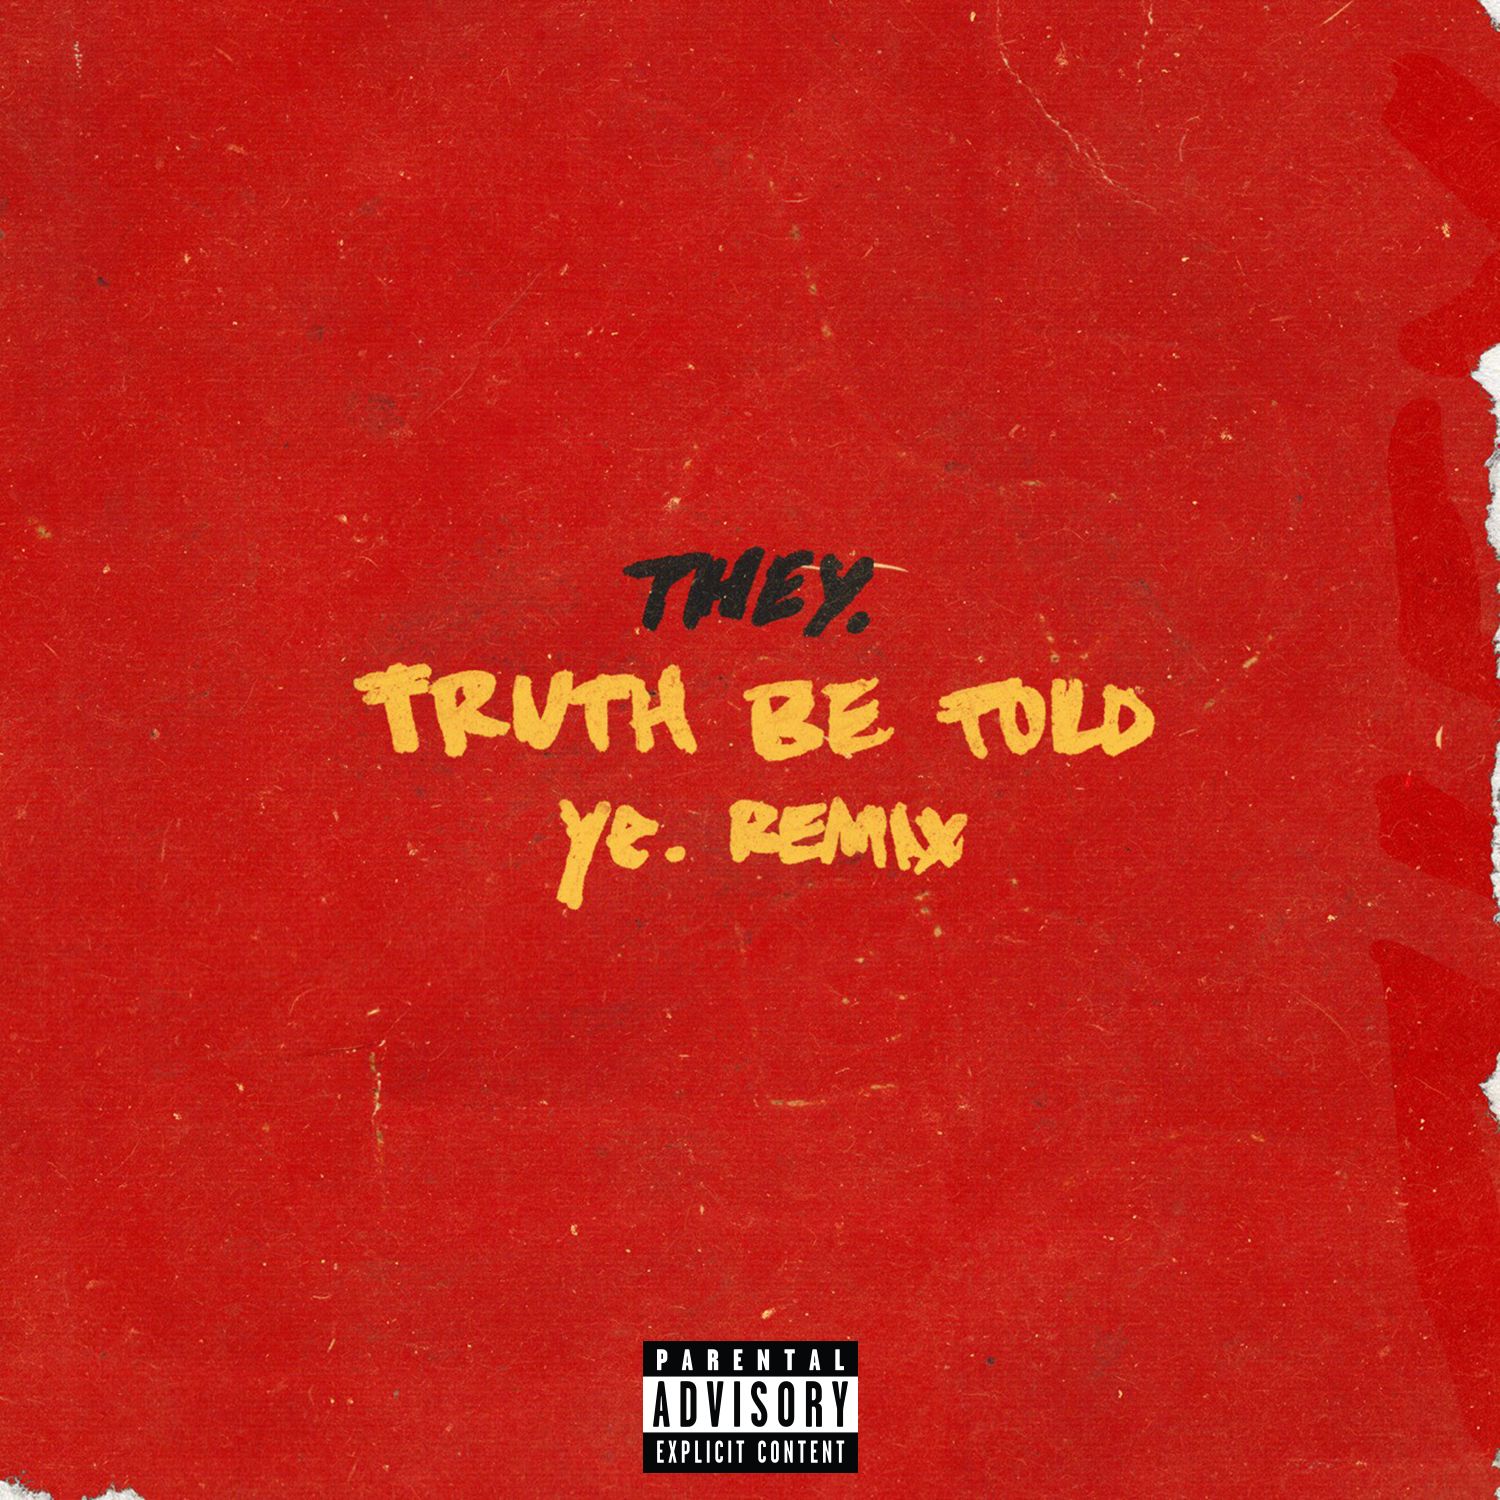 Truth Be Told (Ye. Remix)